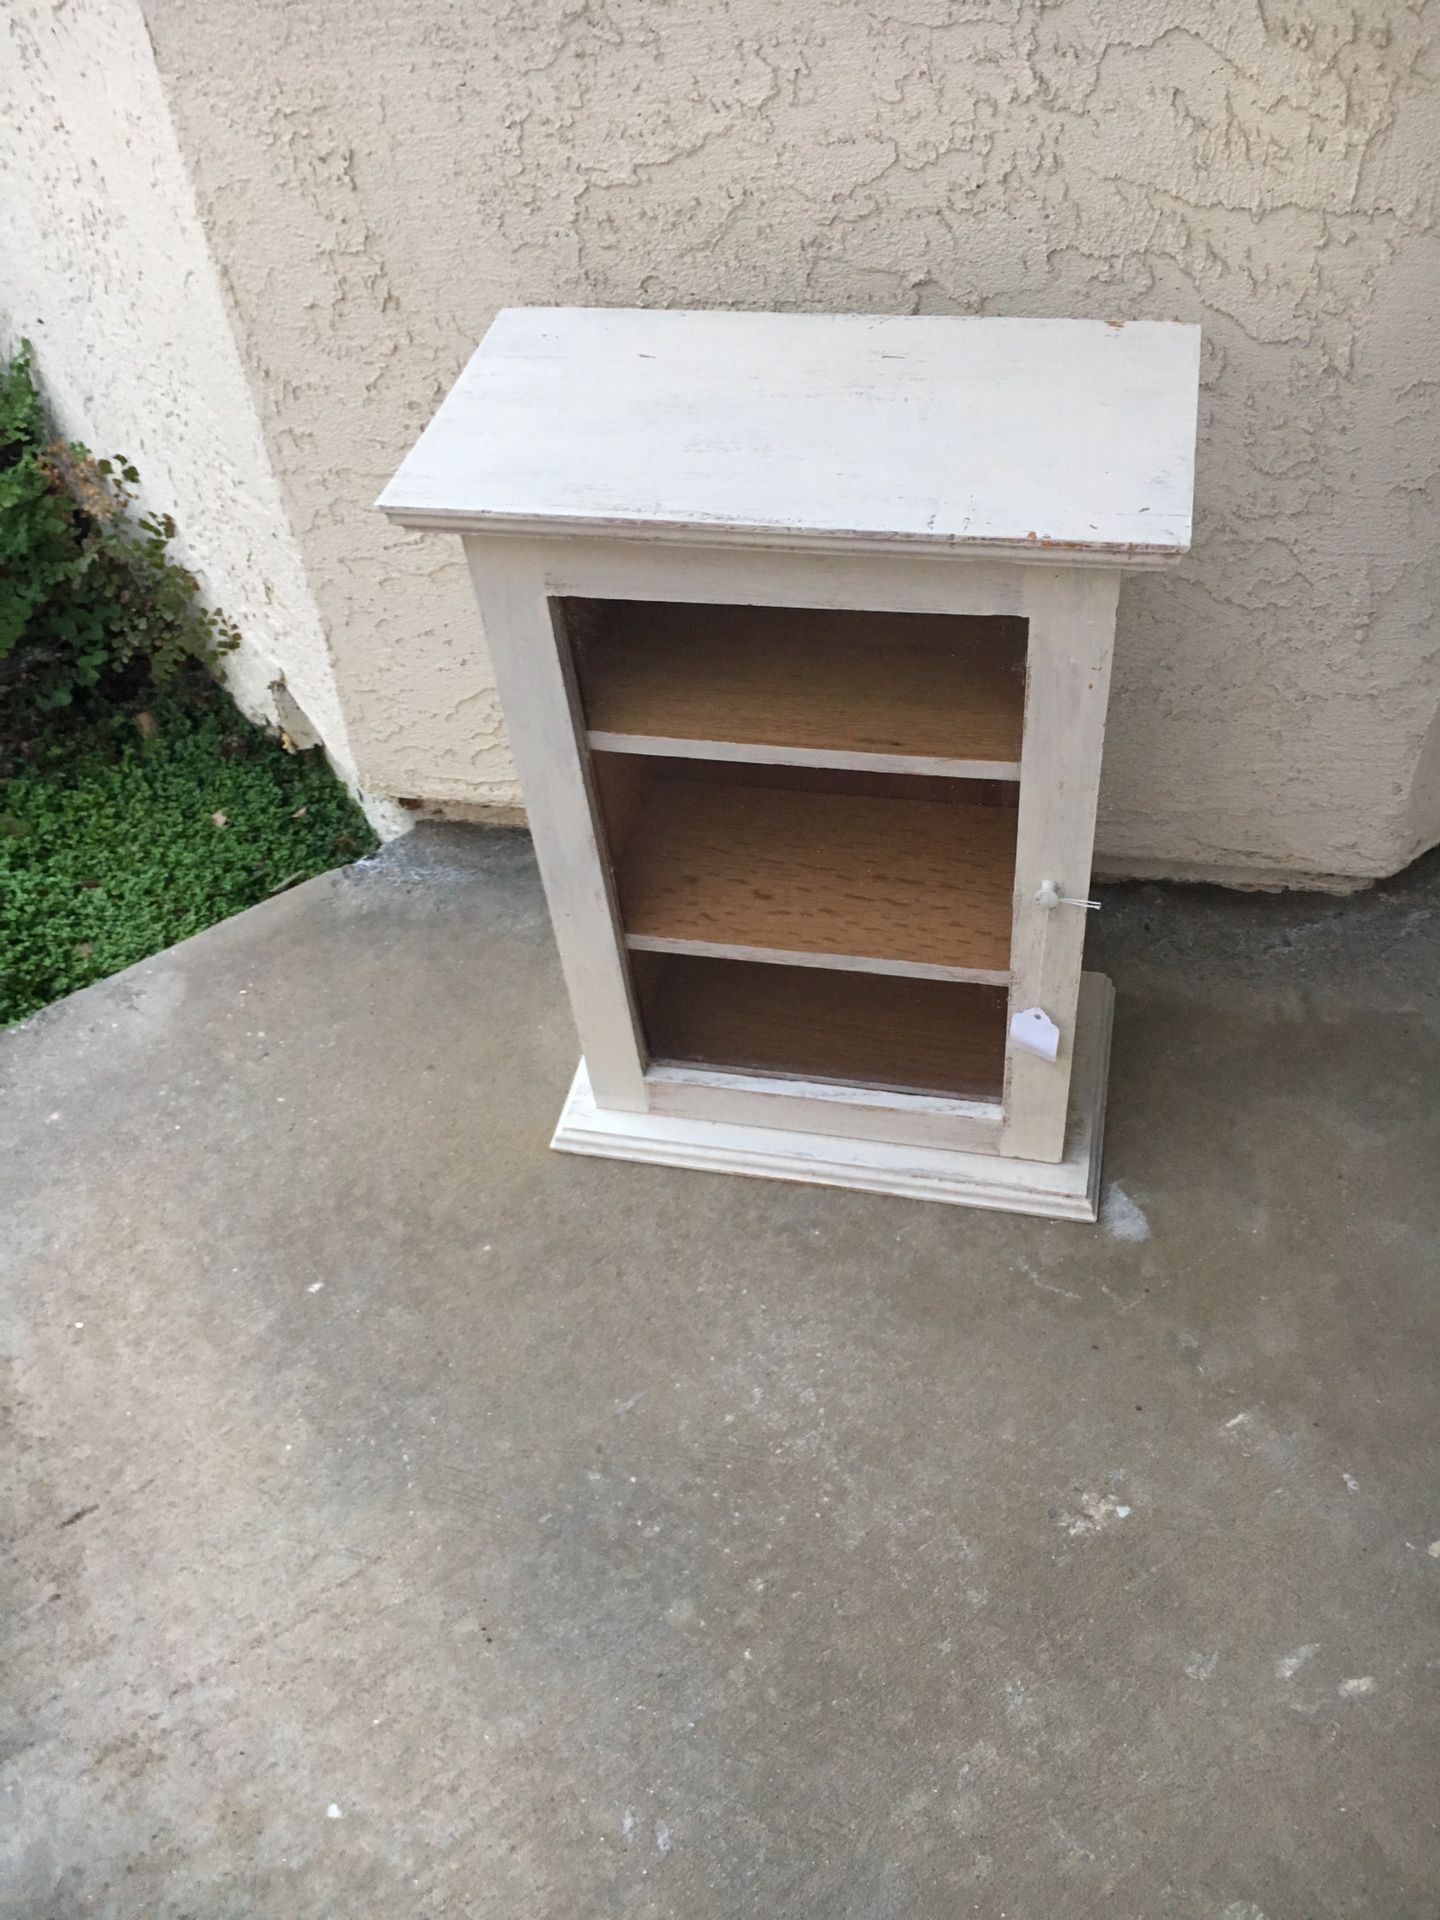 Display Cabinet (19” Tall) $20 FIRM on Price